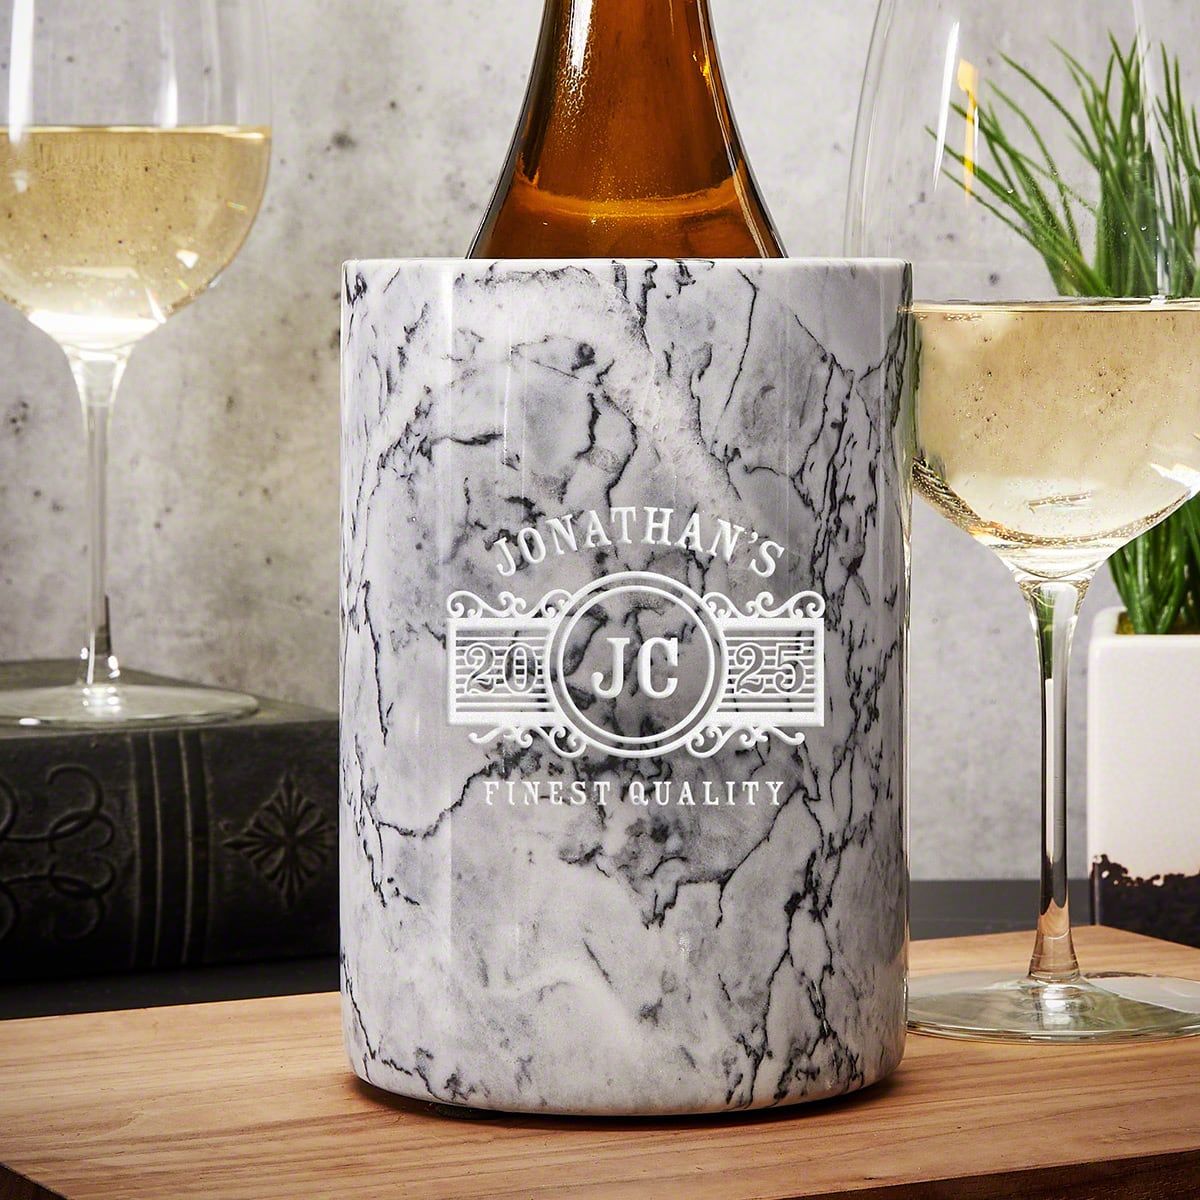 https://images.homewetbar.com/media/catalog/product/c/u/custom-white-marble-wine-chiller-marquee-p-10816.jpg?store=default&image-type=image